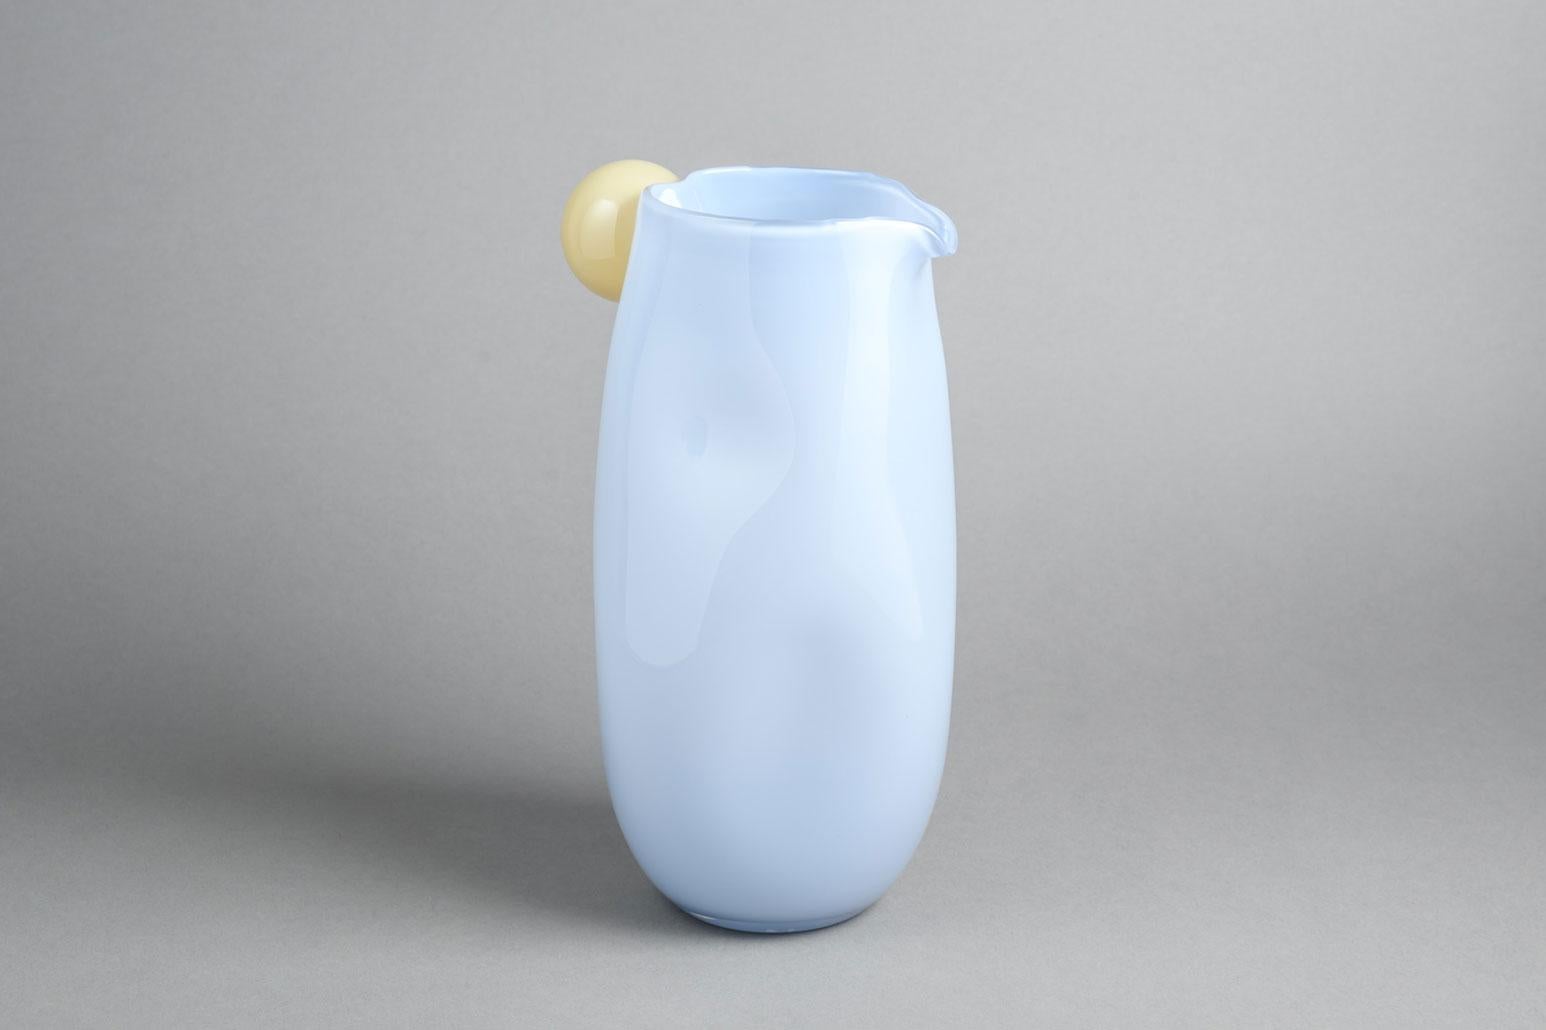 Large Bon Bon Jug with a Twist by Helle Mardahl
Dimensions: D 13 x H 27 cm
Materials: glass
Available in other size,

The Jug Massive with a twist is part of the organically shaped collection of tableware by Helle Mardahl. With the delicious